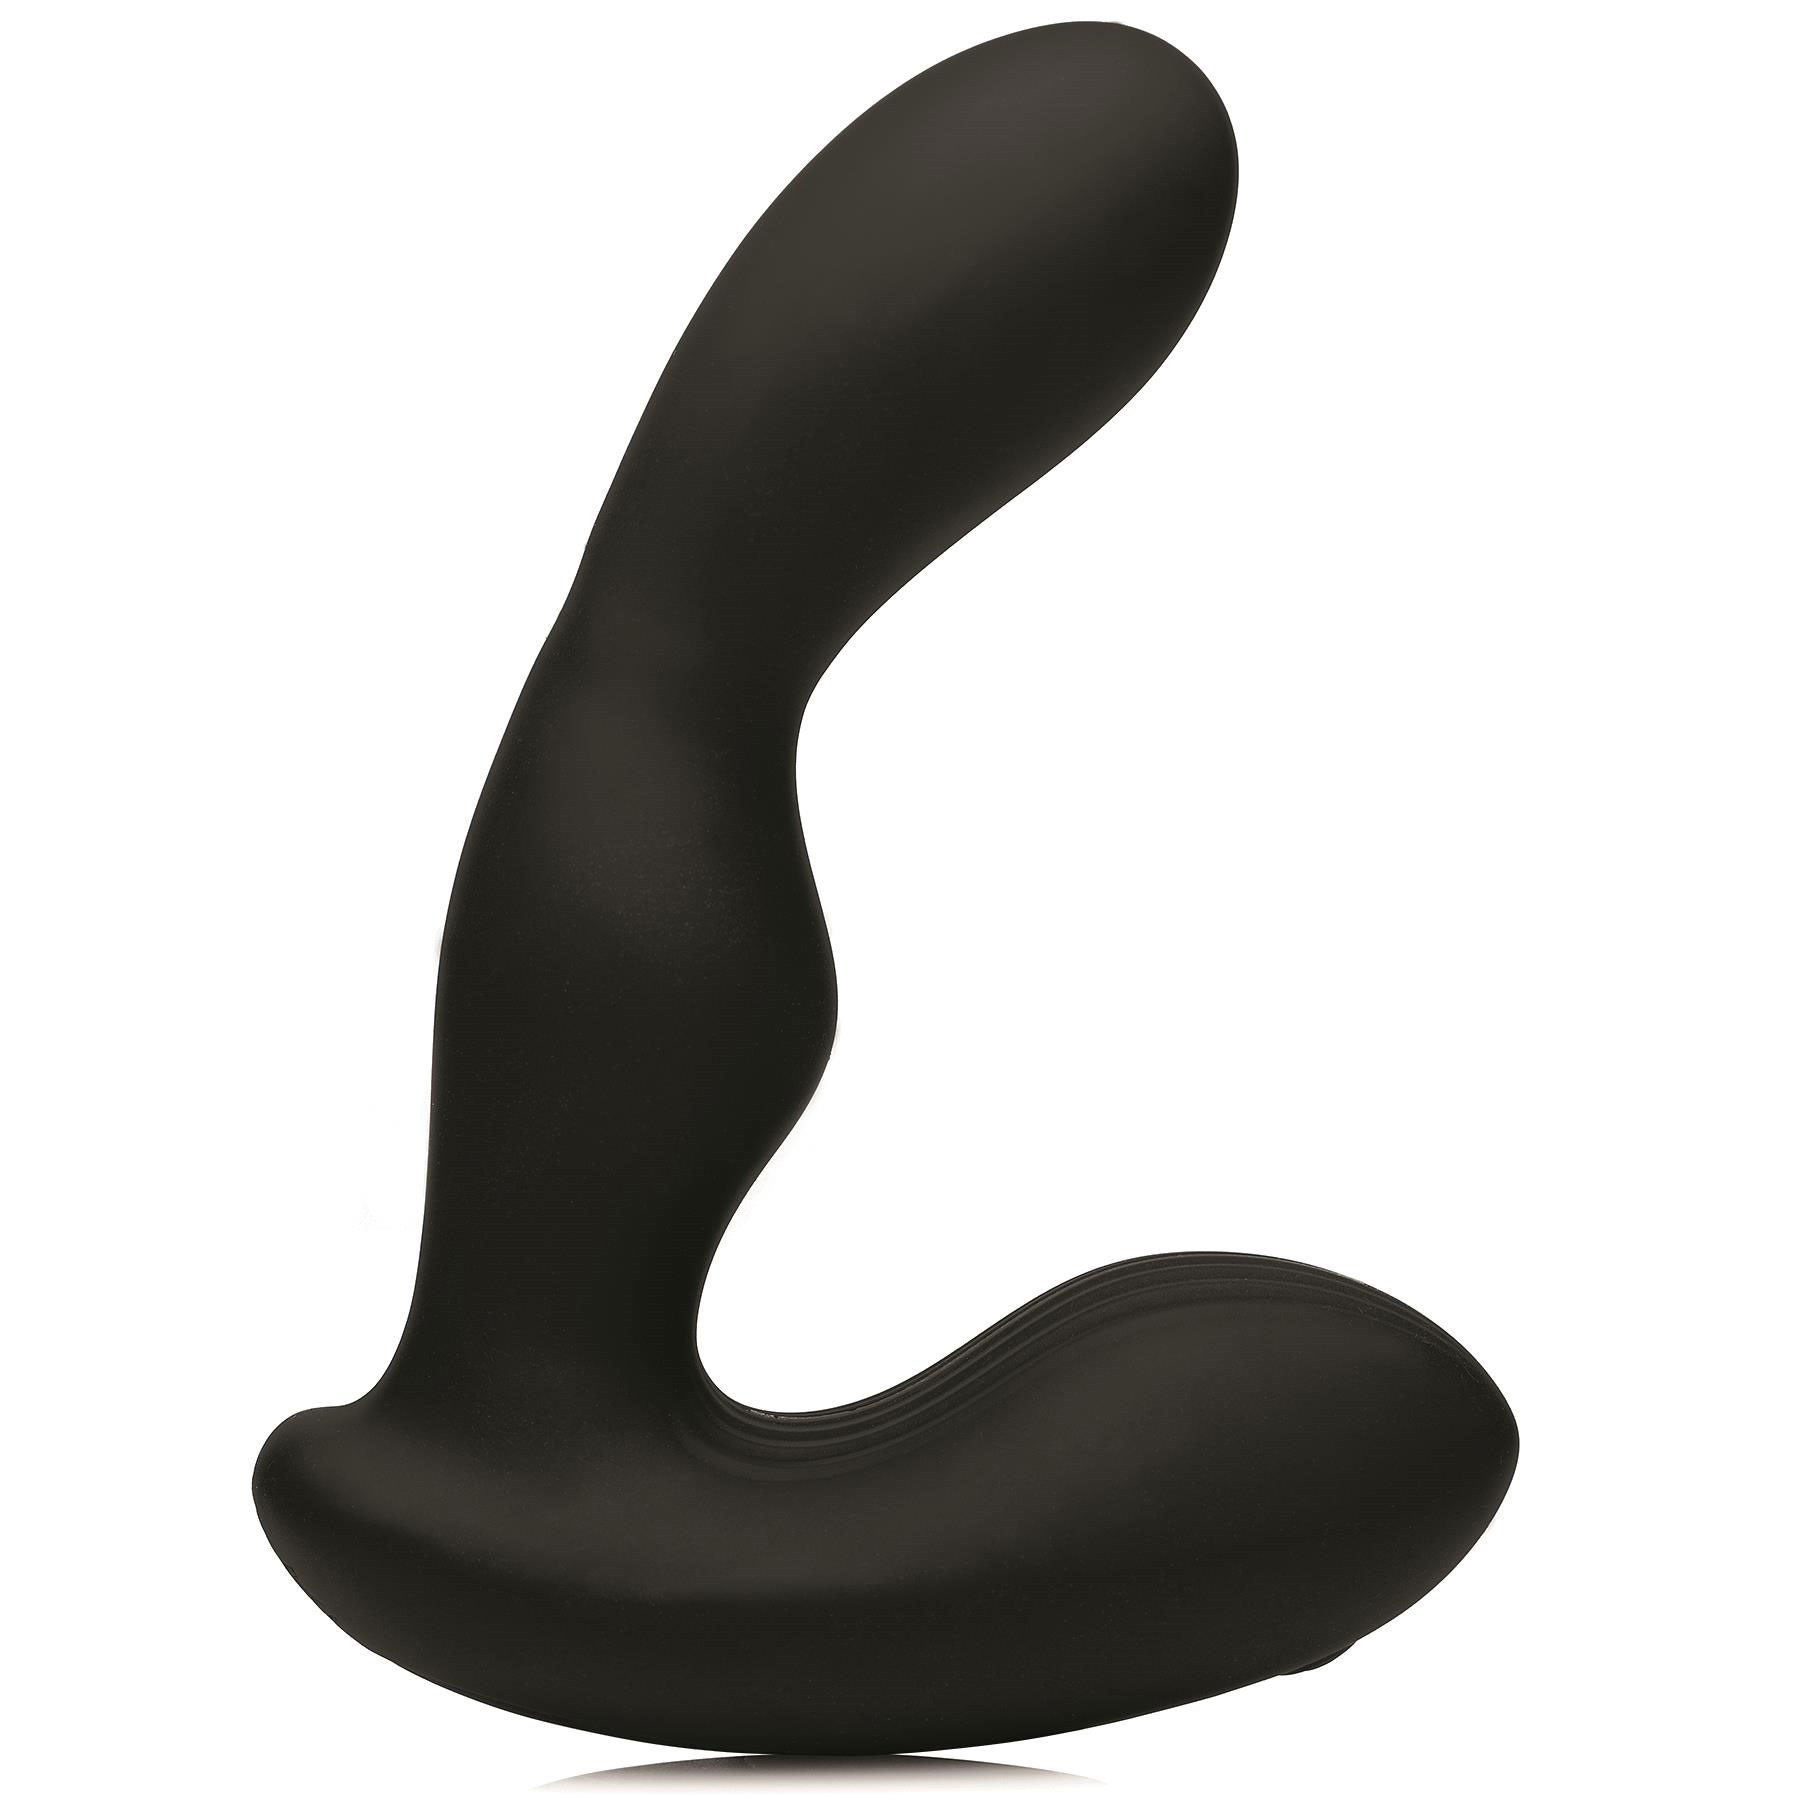 Alpha Pro 7X Prostate Massager right facing upright on table